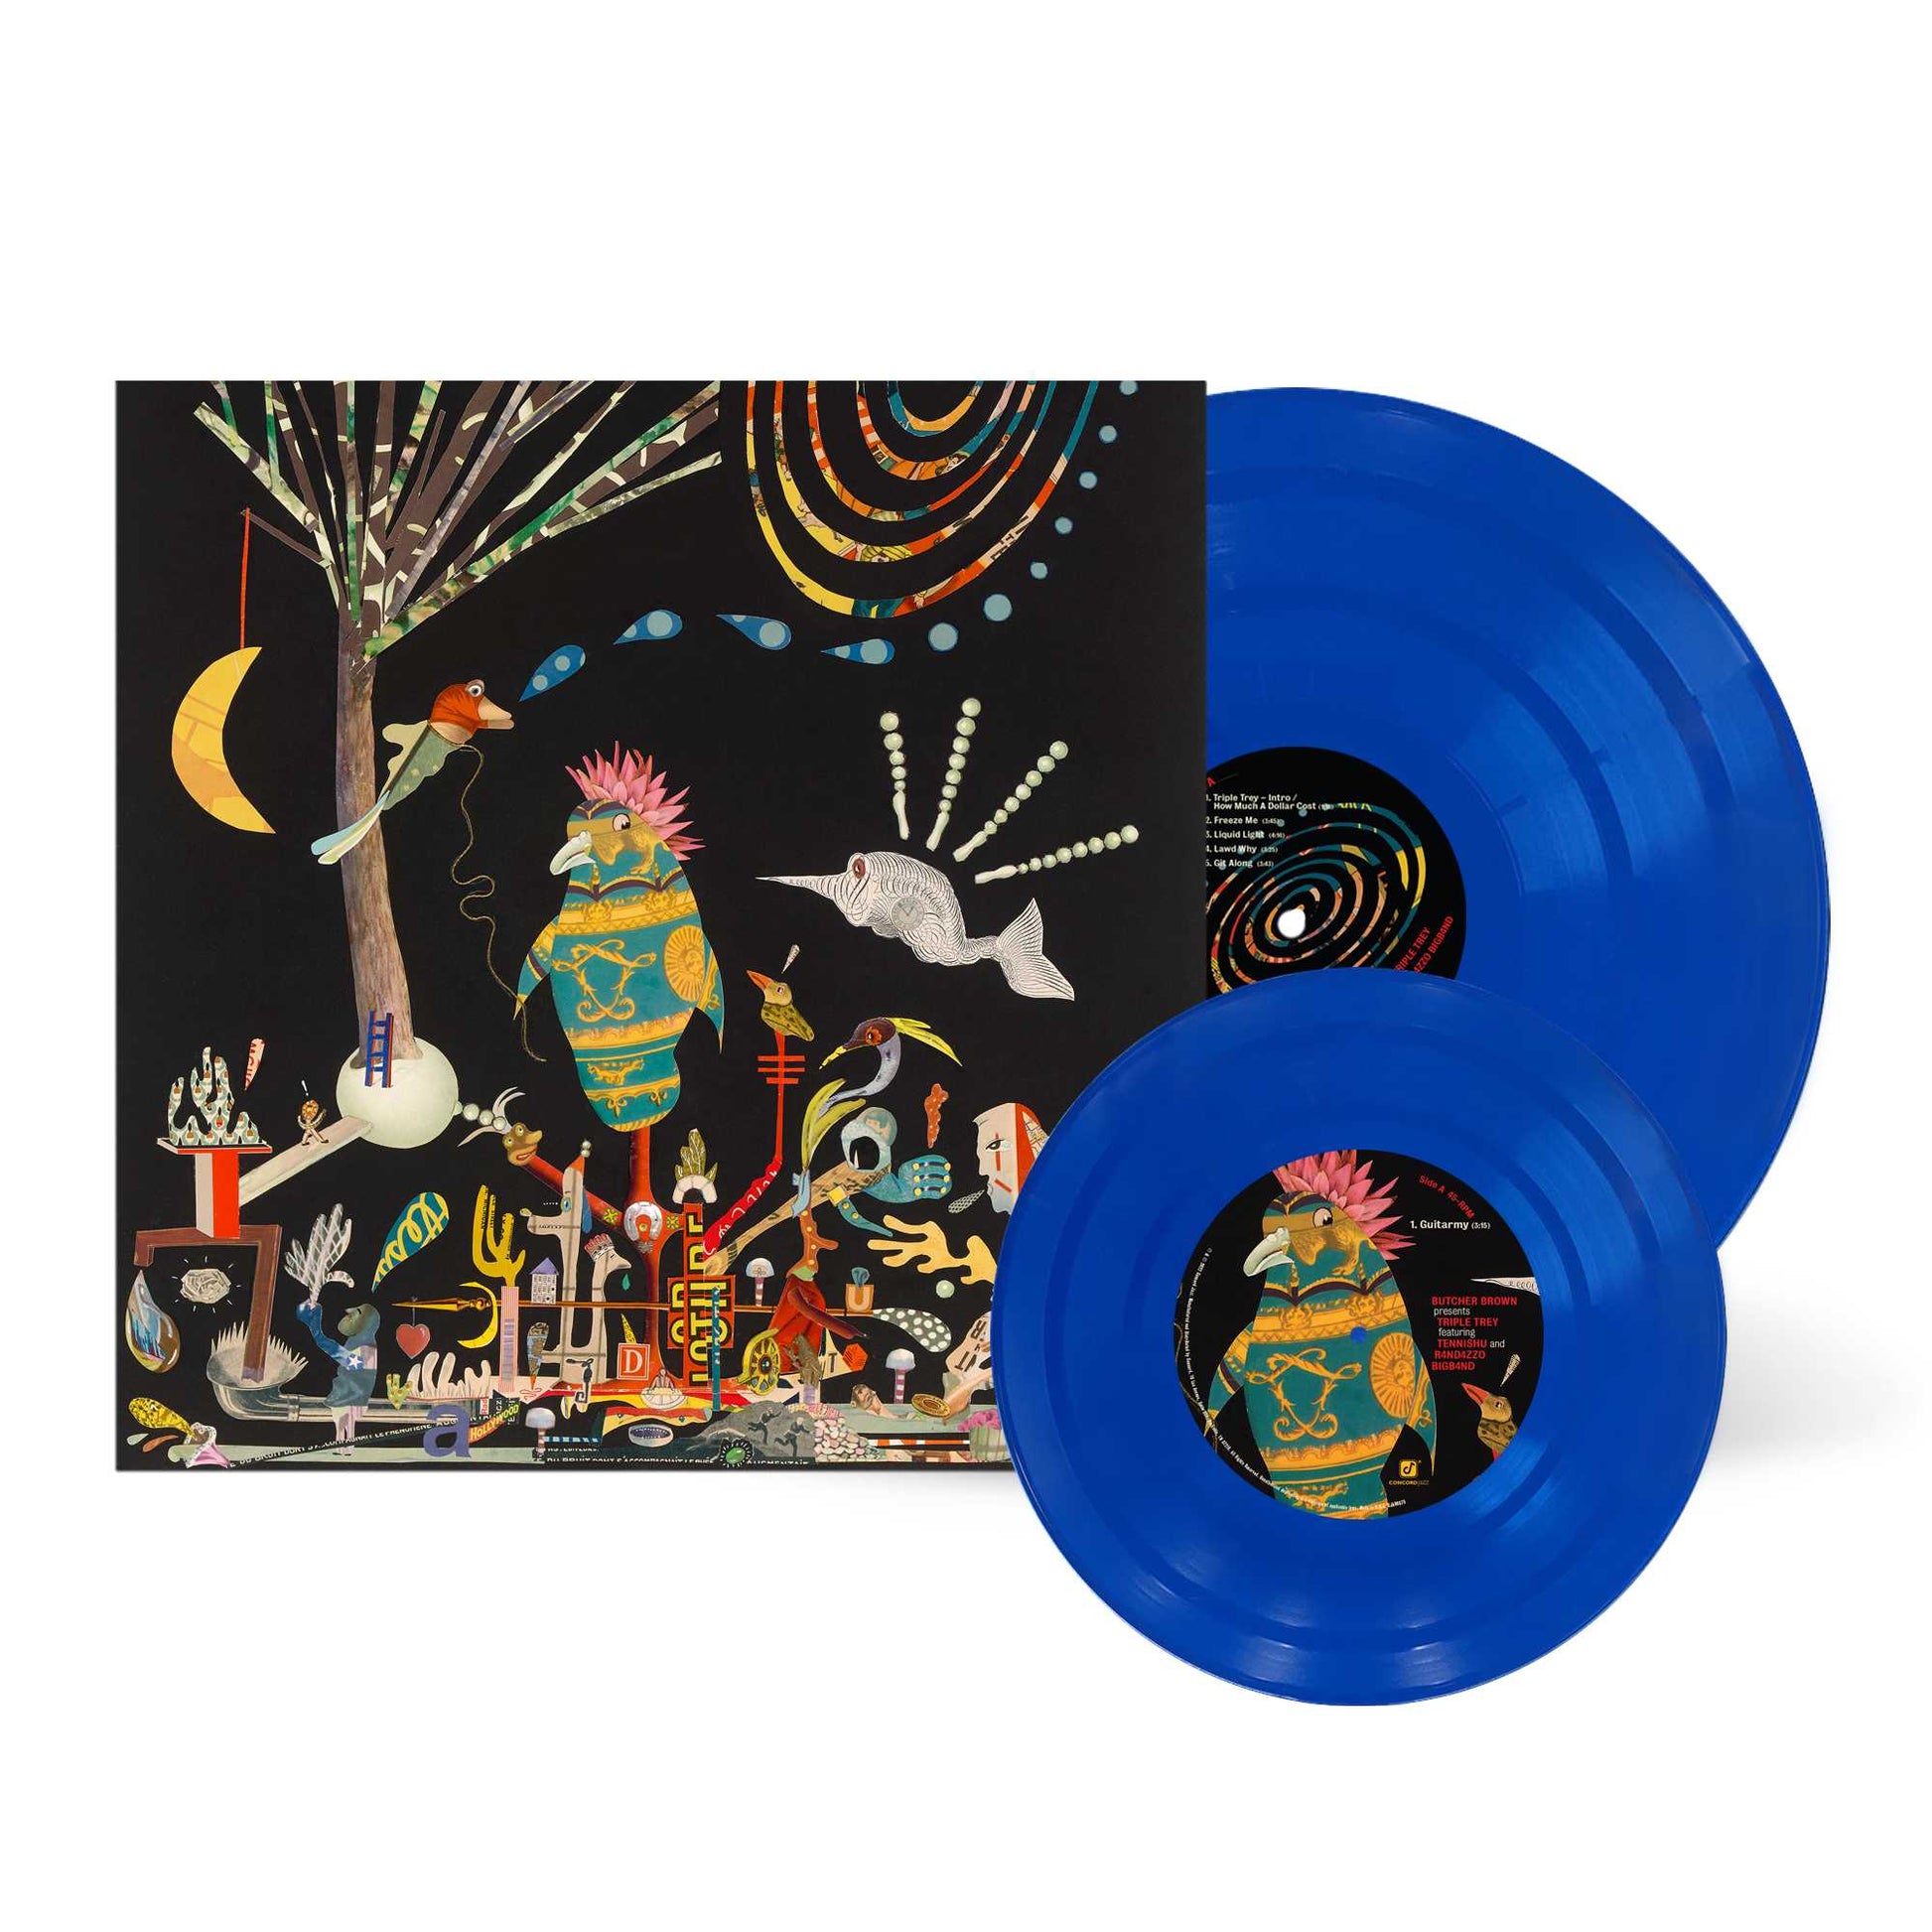 Butcher Brown - Butcher Brown Presents Triple Trey [Limited Edition With Bonus 7 Inch Colored Vinyl Blue Indie Exclusive]